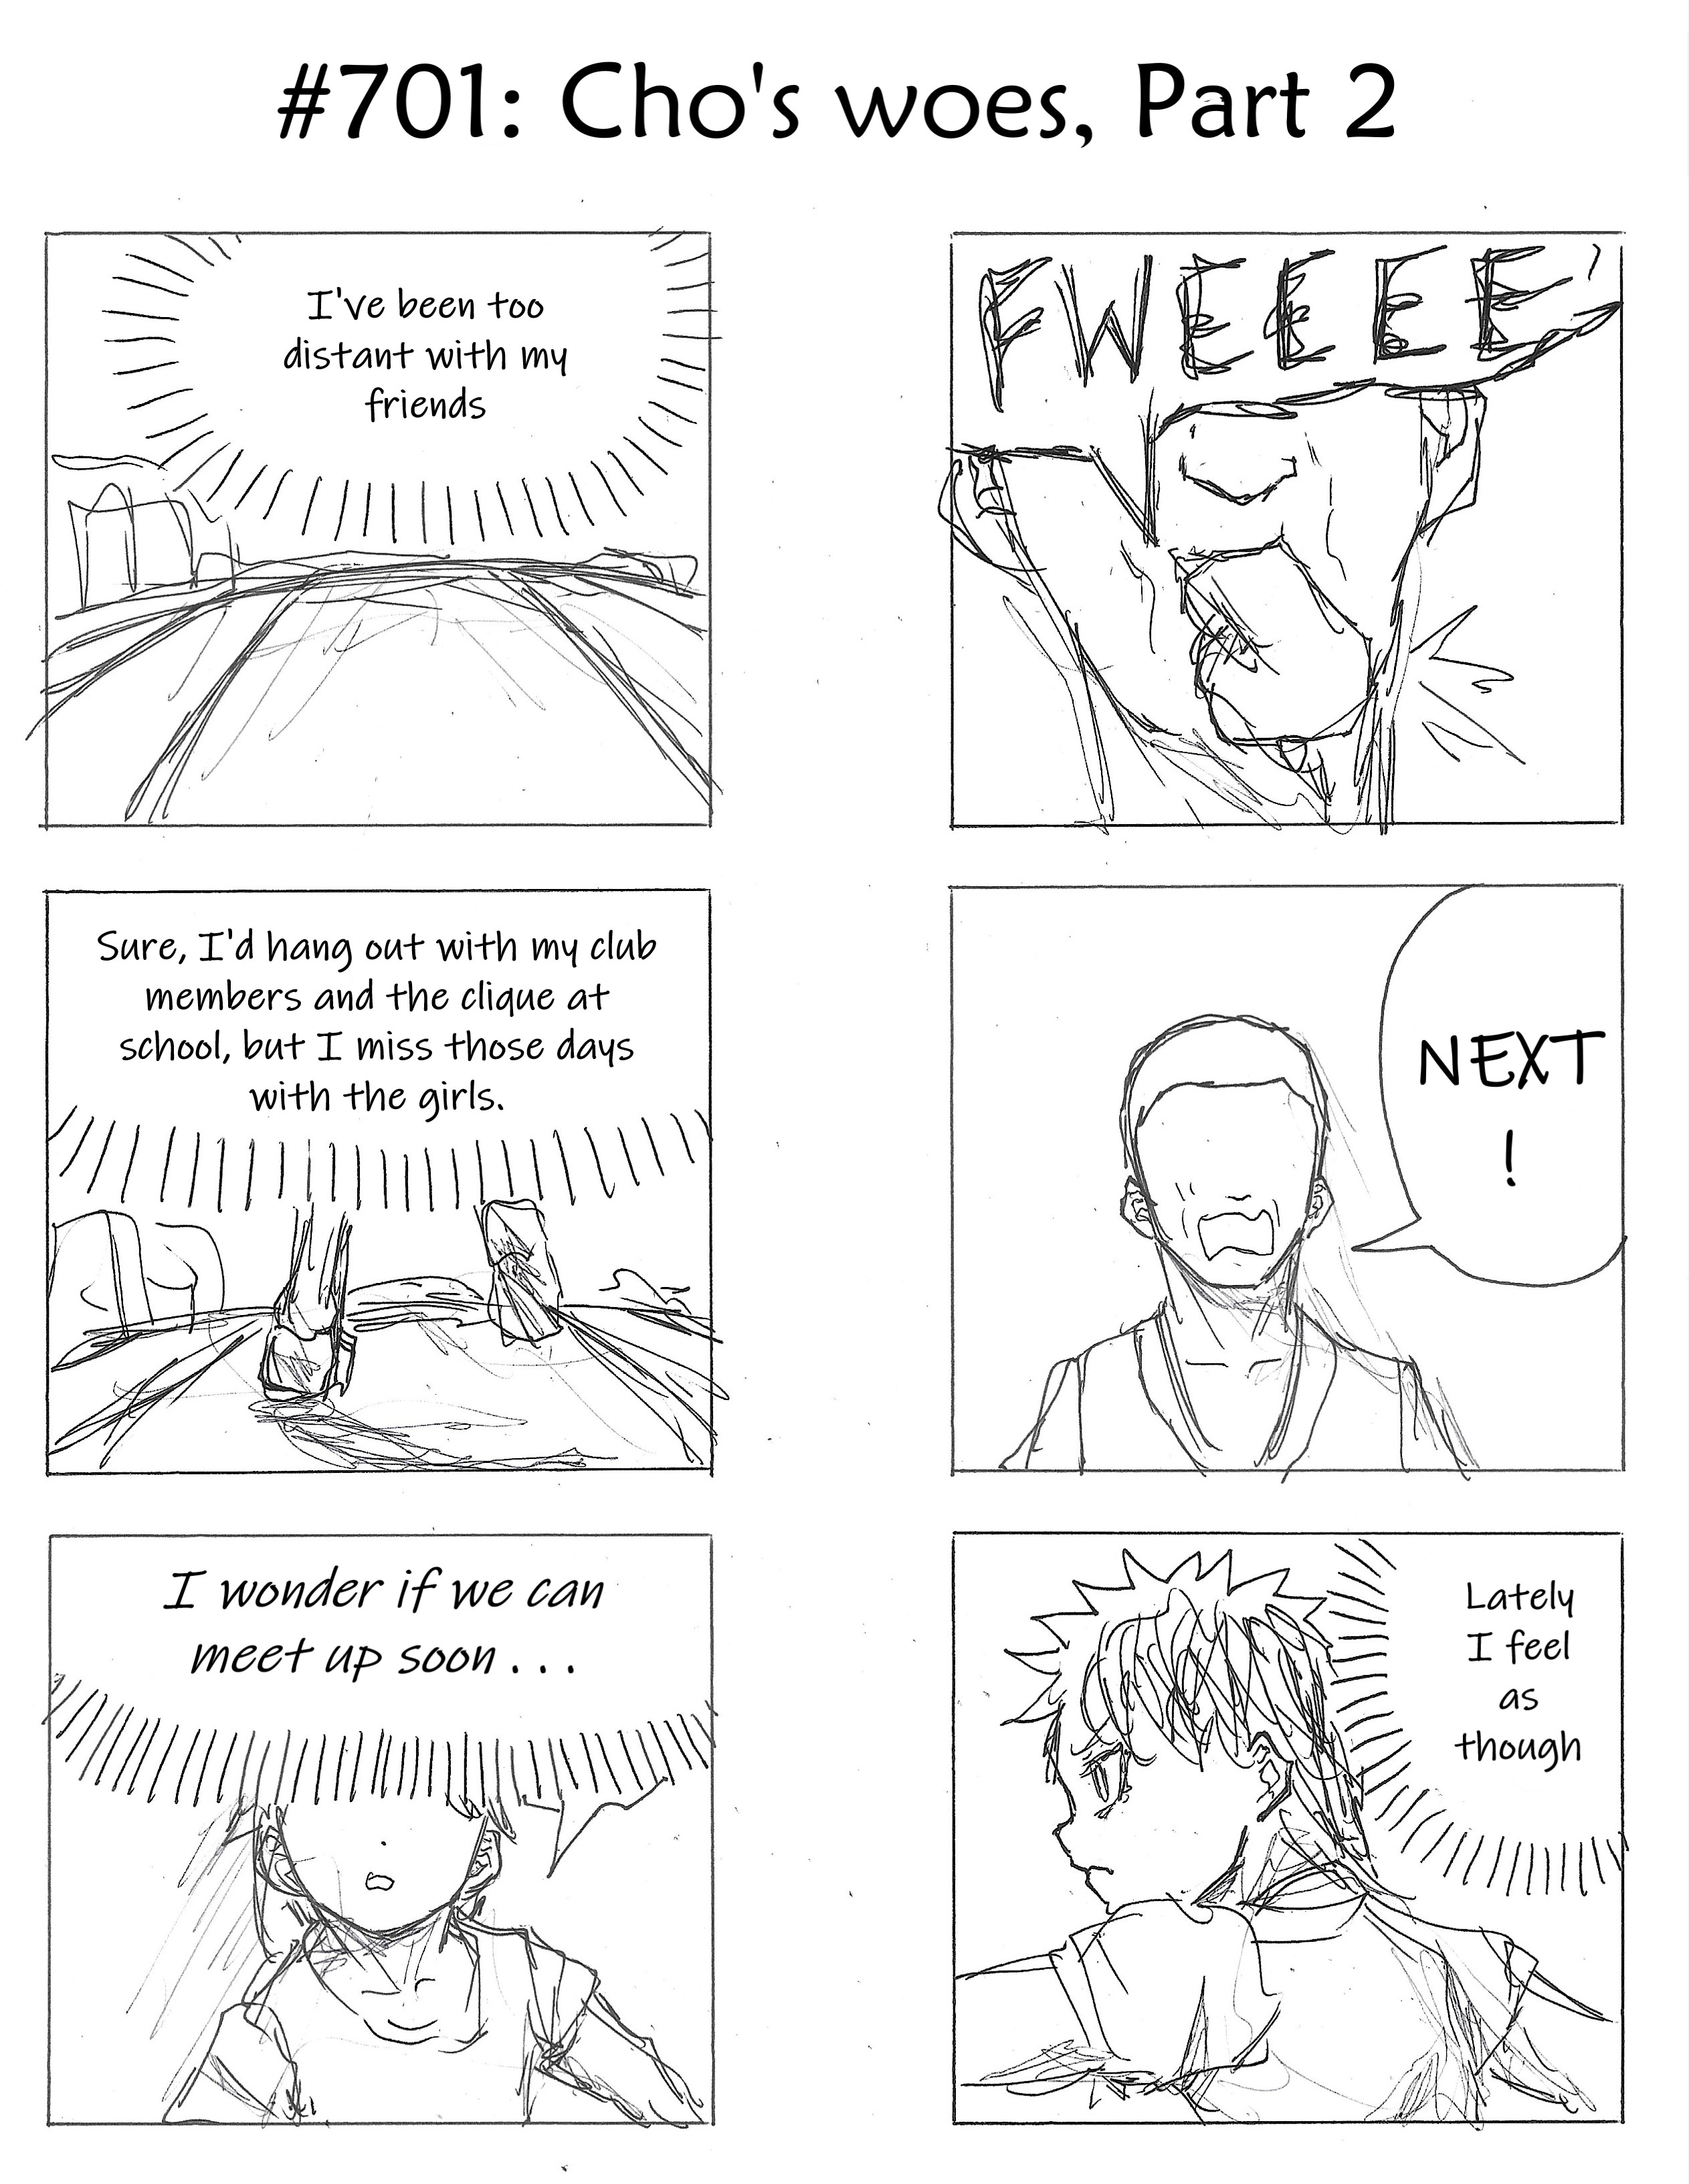 Sound Asleep: Forgotten Memories Vol.7 Chapter 701: Cho’S Woes, Part 2 - Picture 1